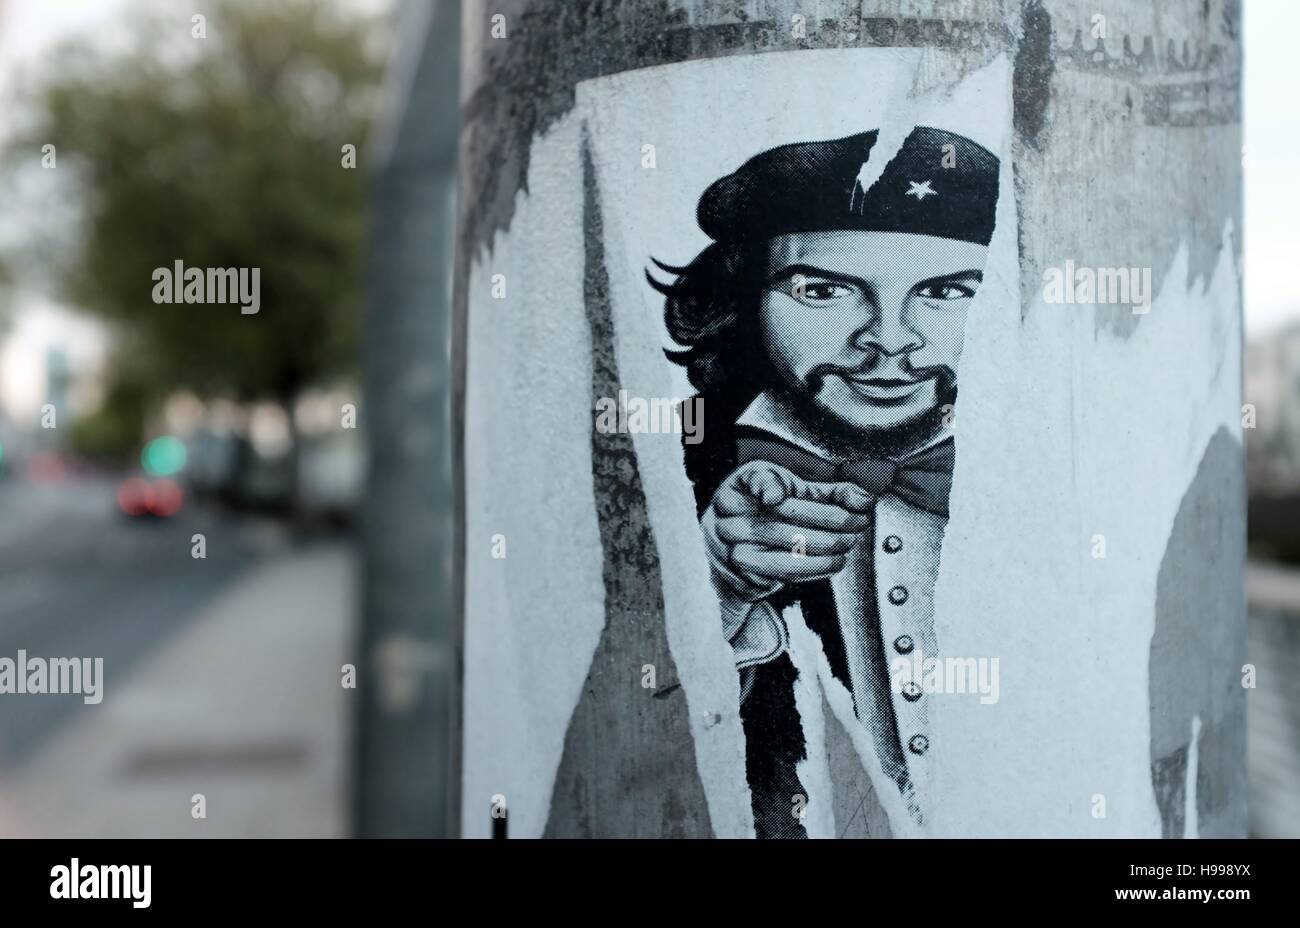 The Marxist revolutionary, Che Guevara, prevails as a symbol of political resistance. Stock Photo